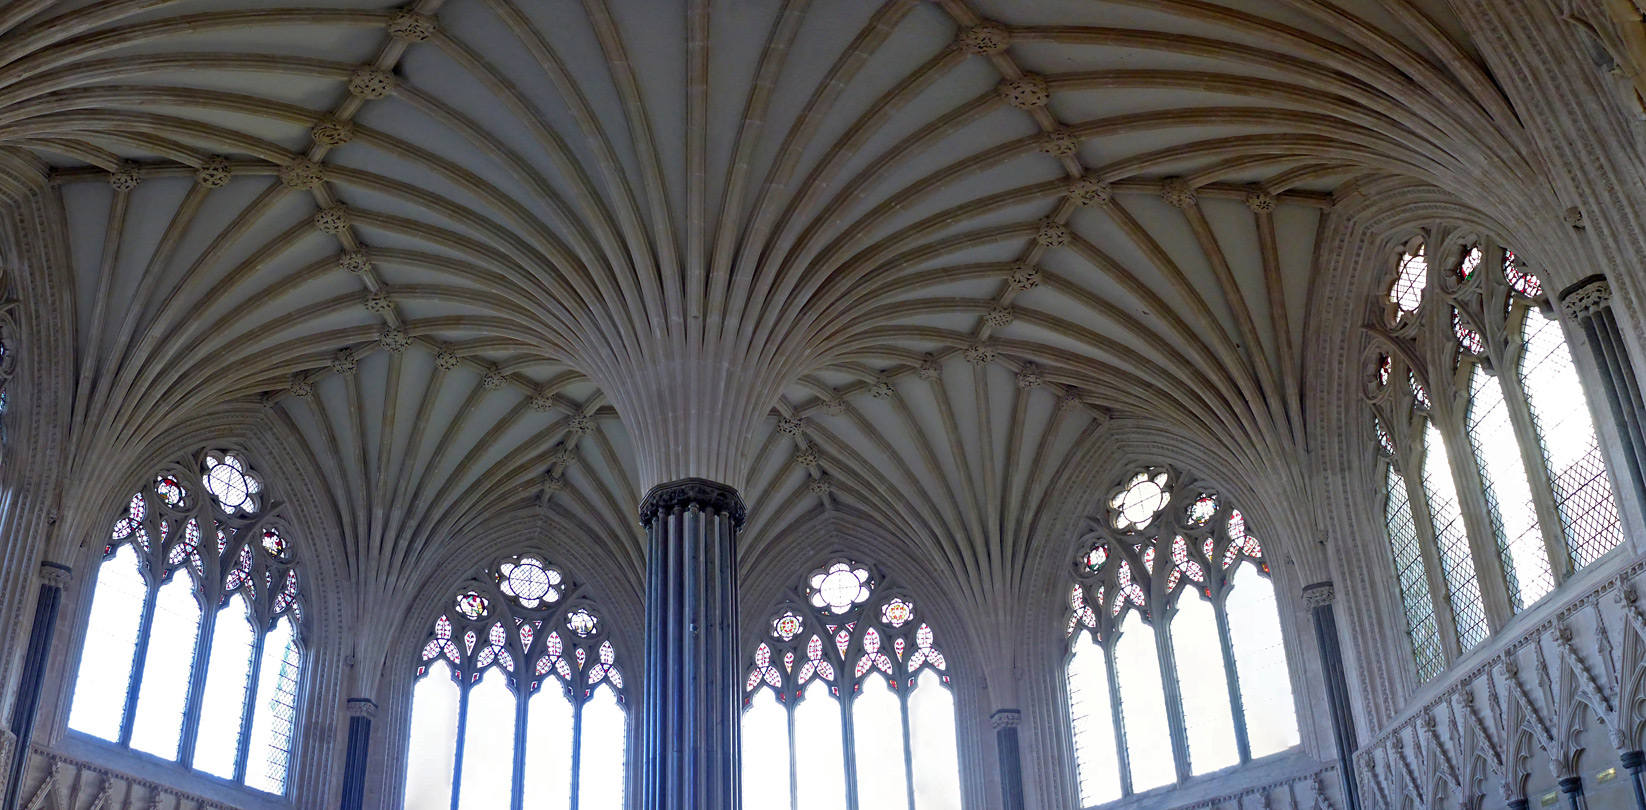 Ceiling of the chapter house